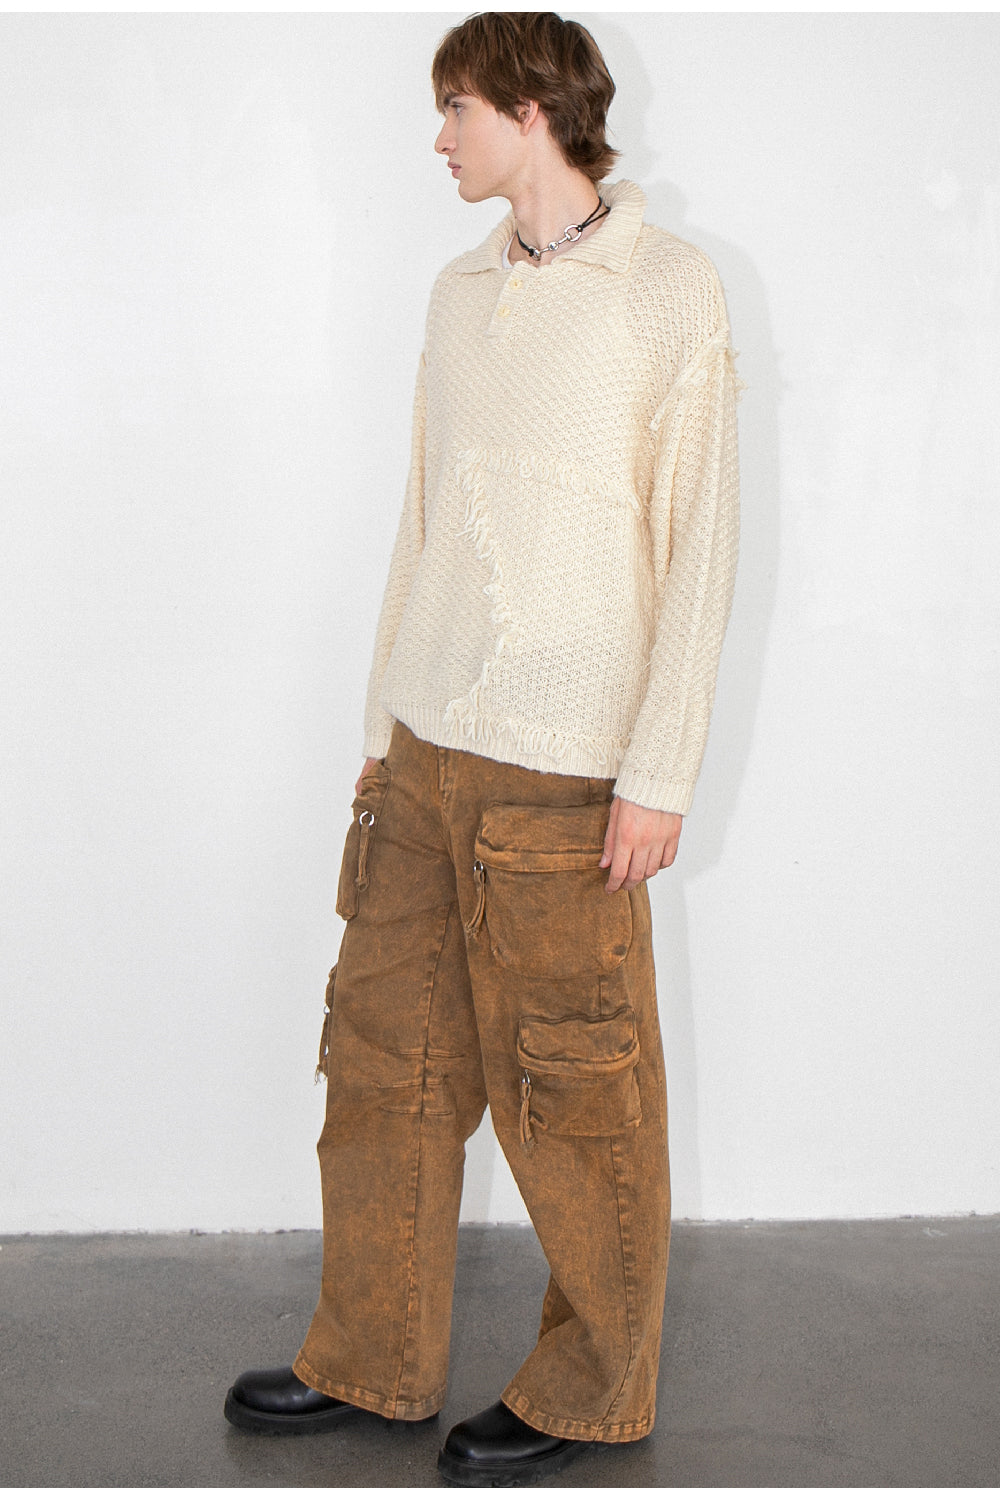 Old Fashioned Workwear Casual Pants